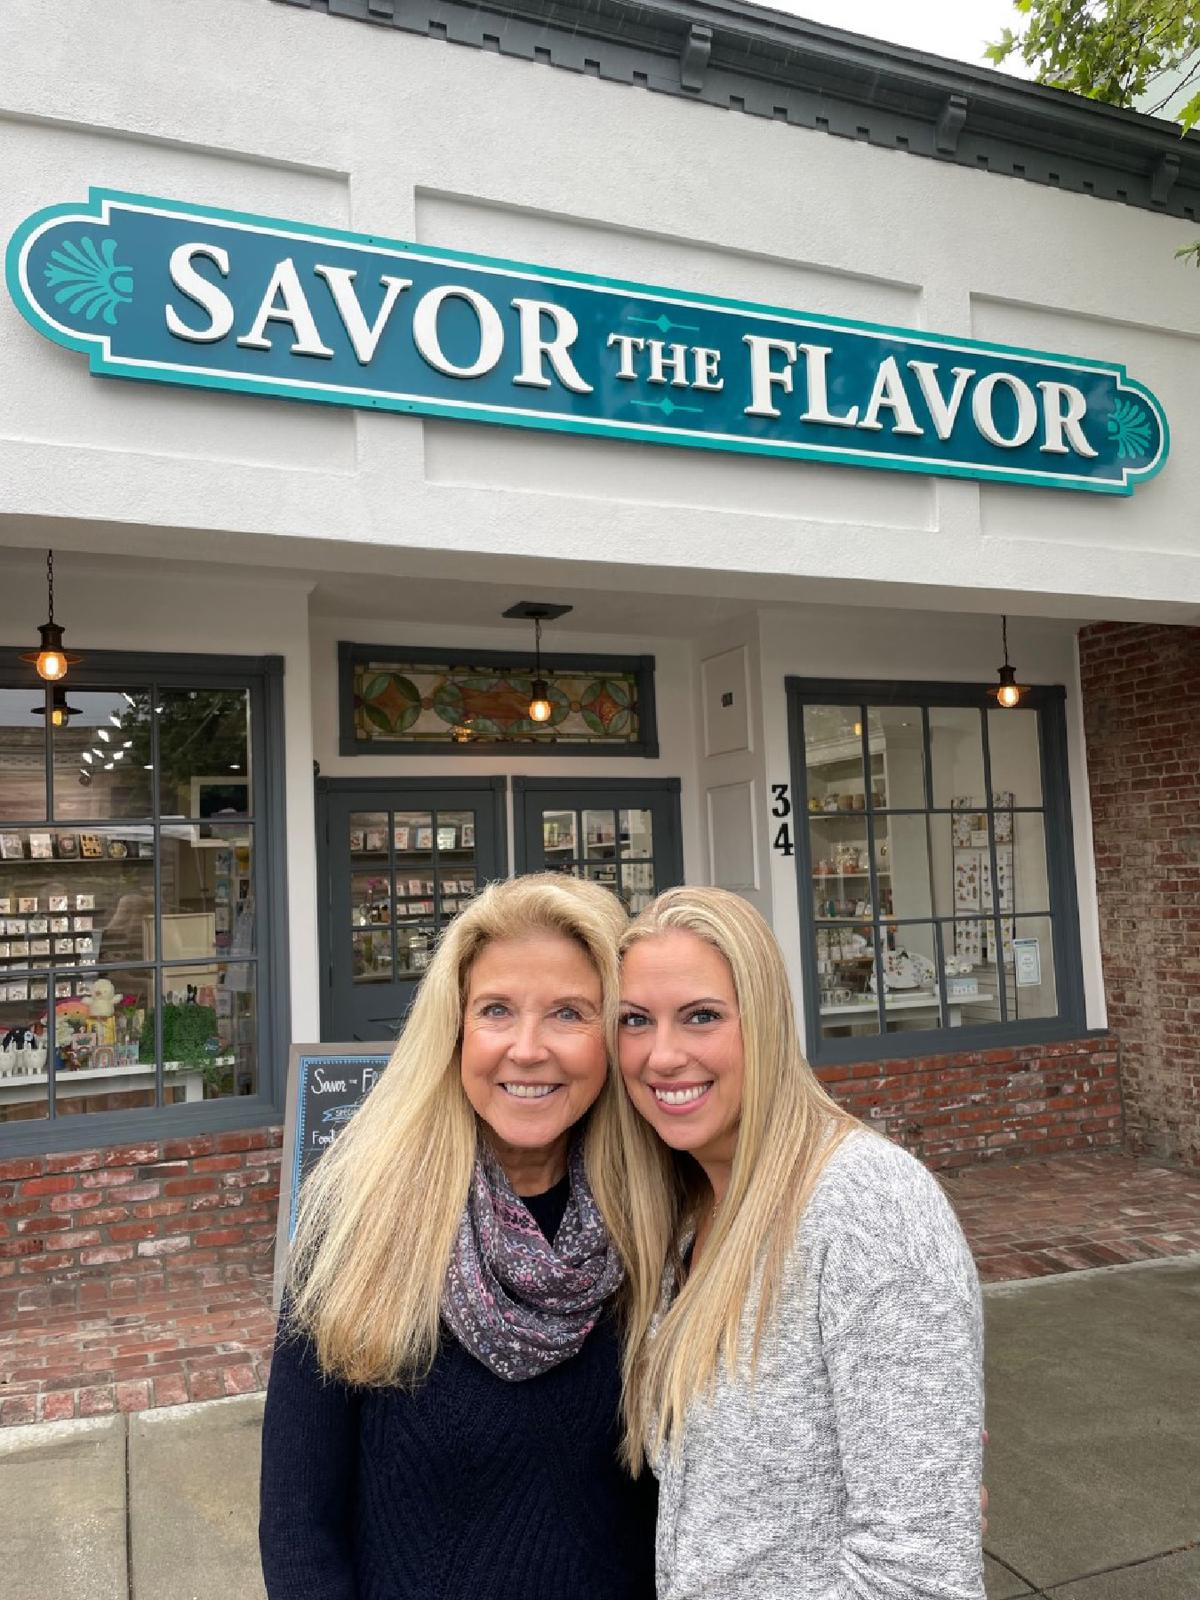 Karen Keegan and her daughter Madeline Romo are the founder and current owner, respectively, of specialty food and gourmet gift shop Savor the Flavor, one of Sierra Madre's most popular businesses. (Courtesy of Jim Manoledes)